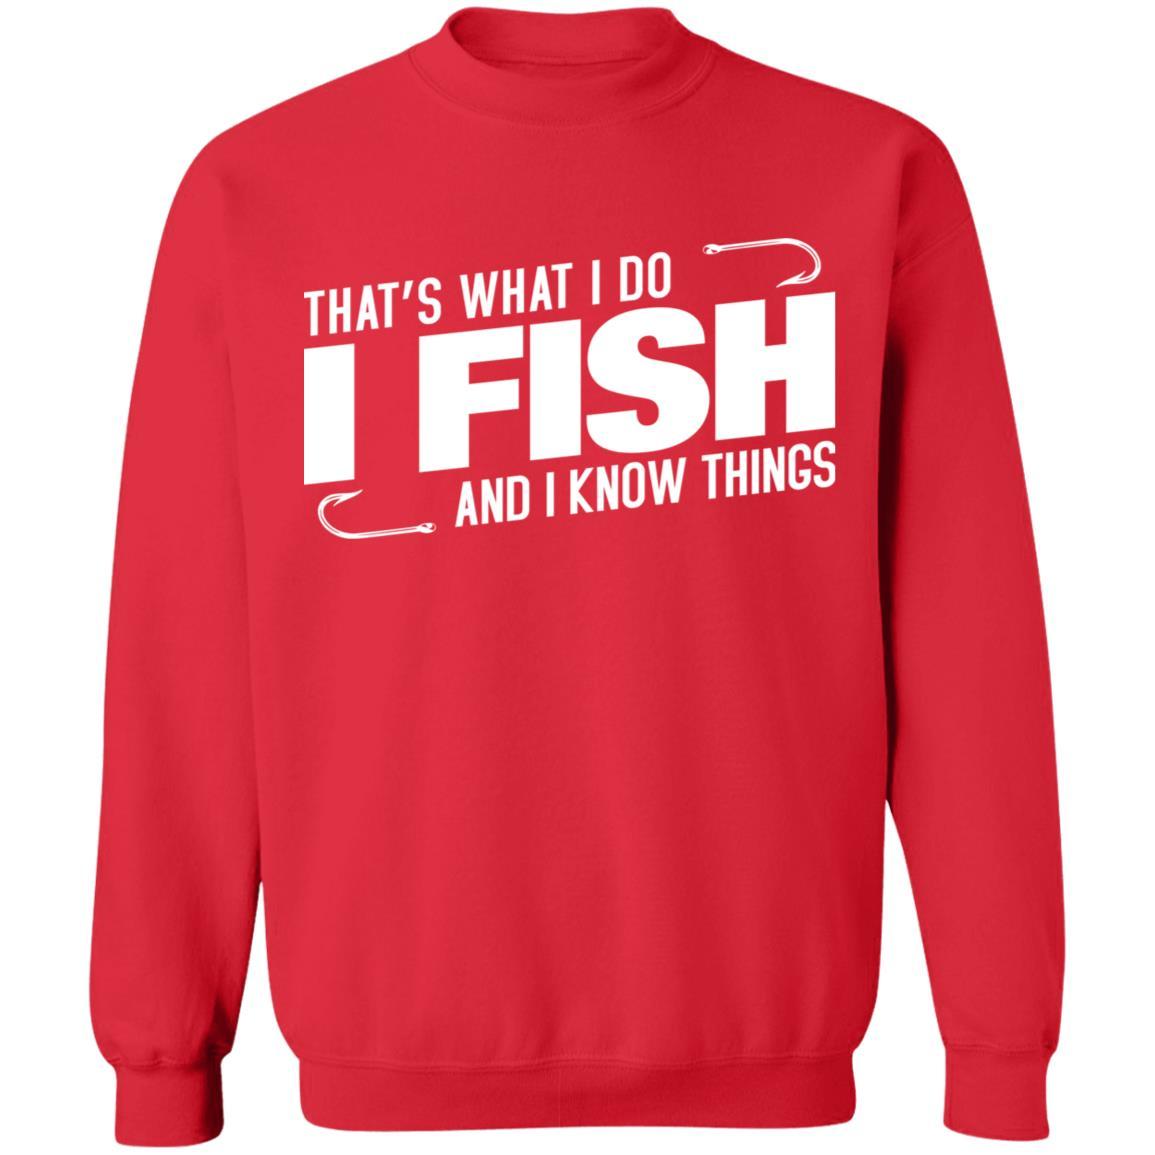 That's what i do i fish and i know things sweatshirt i red